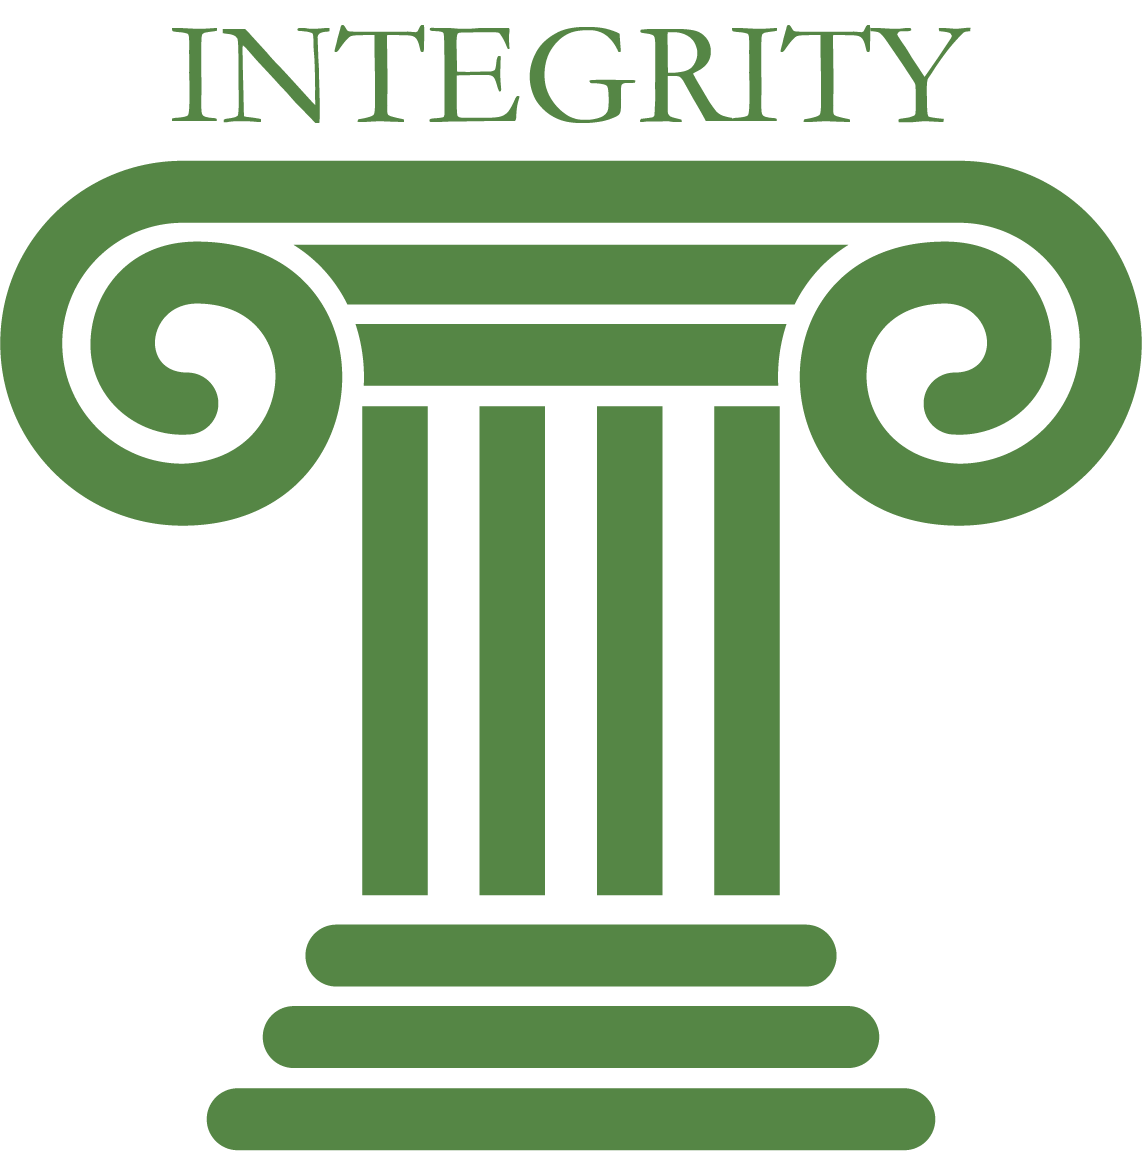 Greek Pillar with the word Integrity at the top